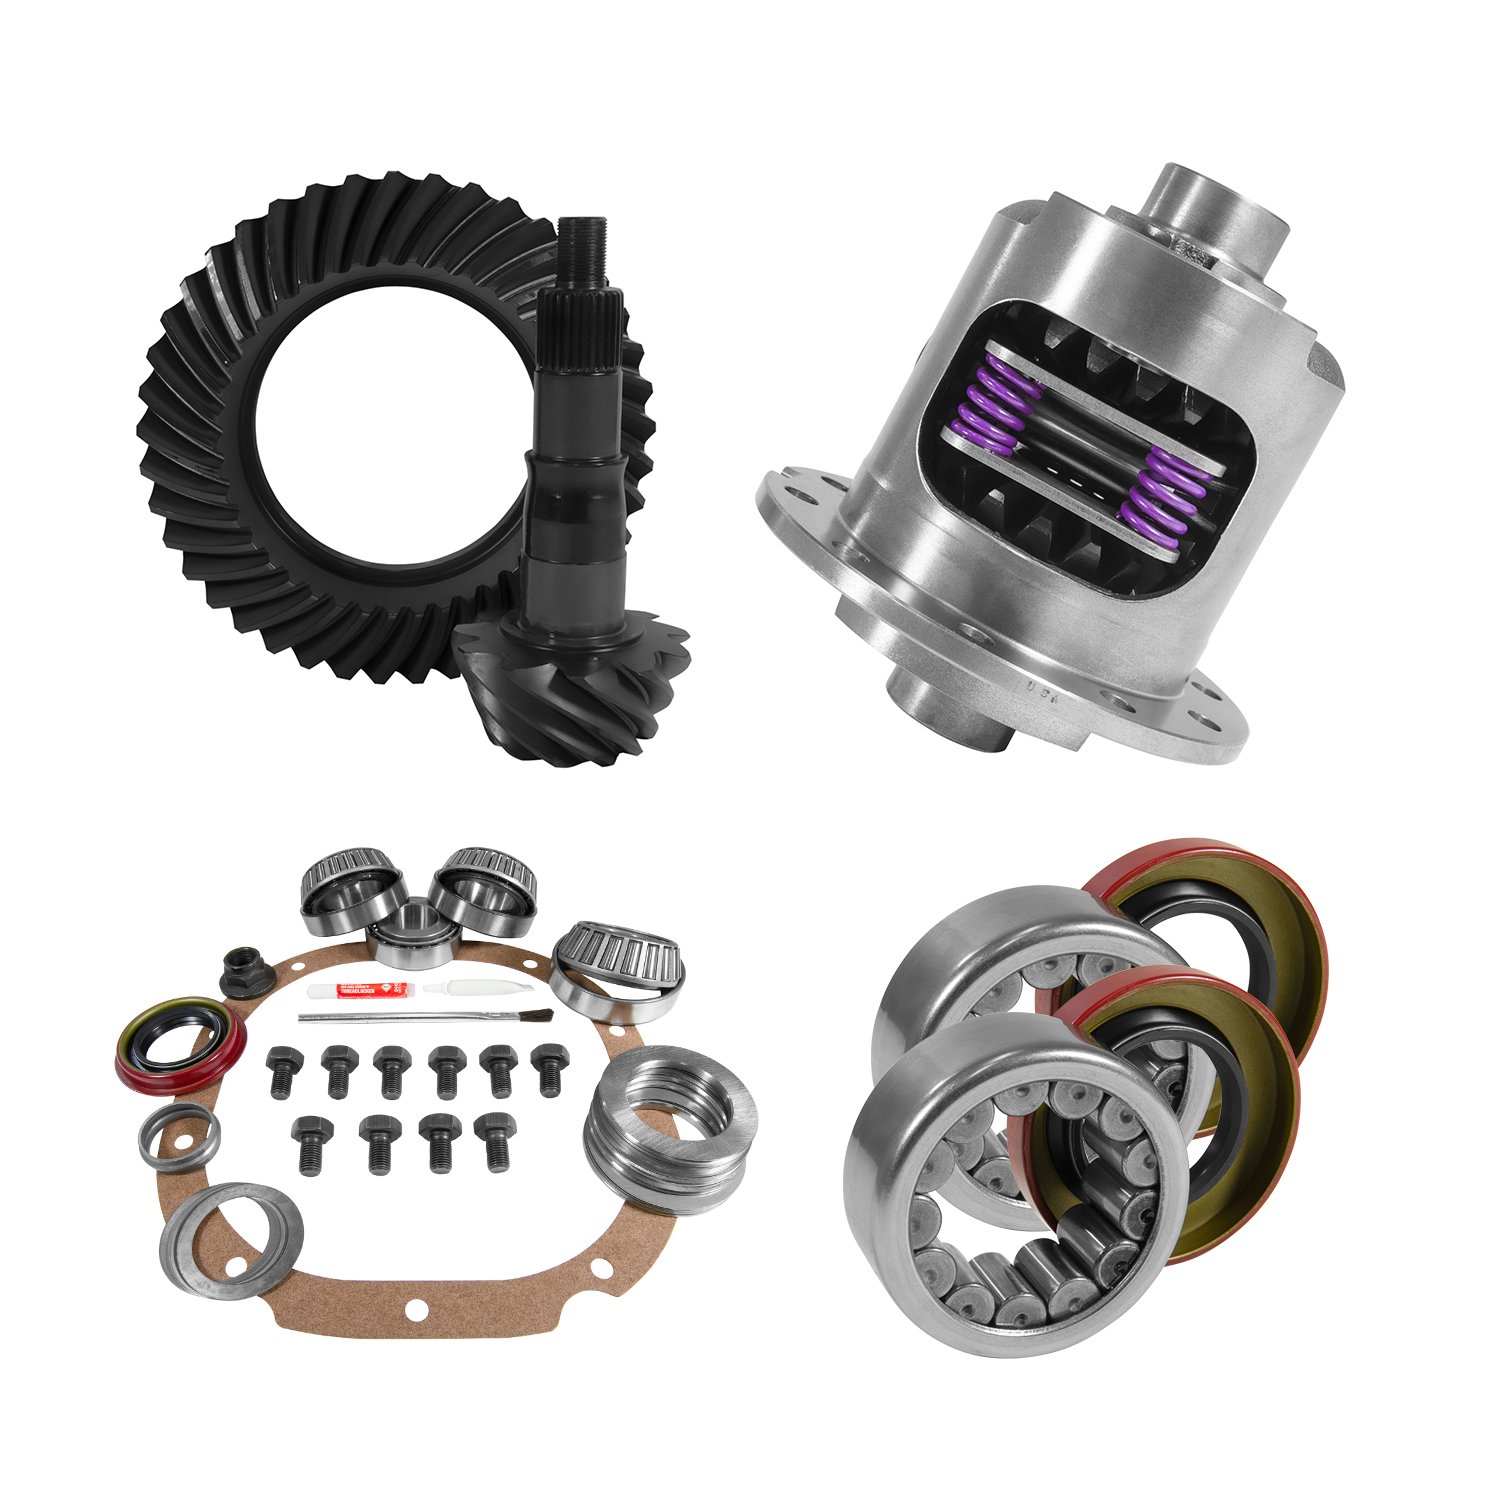 USA Standard 10774 8.8 in. Ford 4.56 Rear Ring & Pinion Install Kit, 31Spl Posi, 2.99 in. Axle Bearings